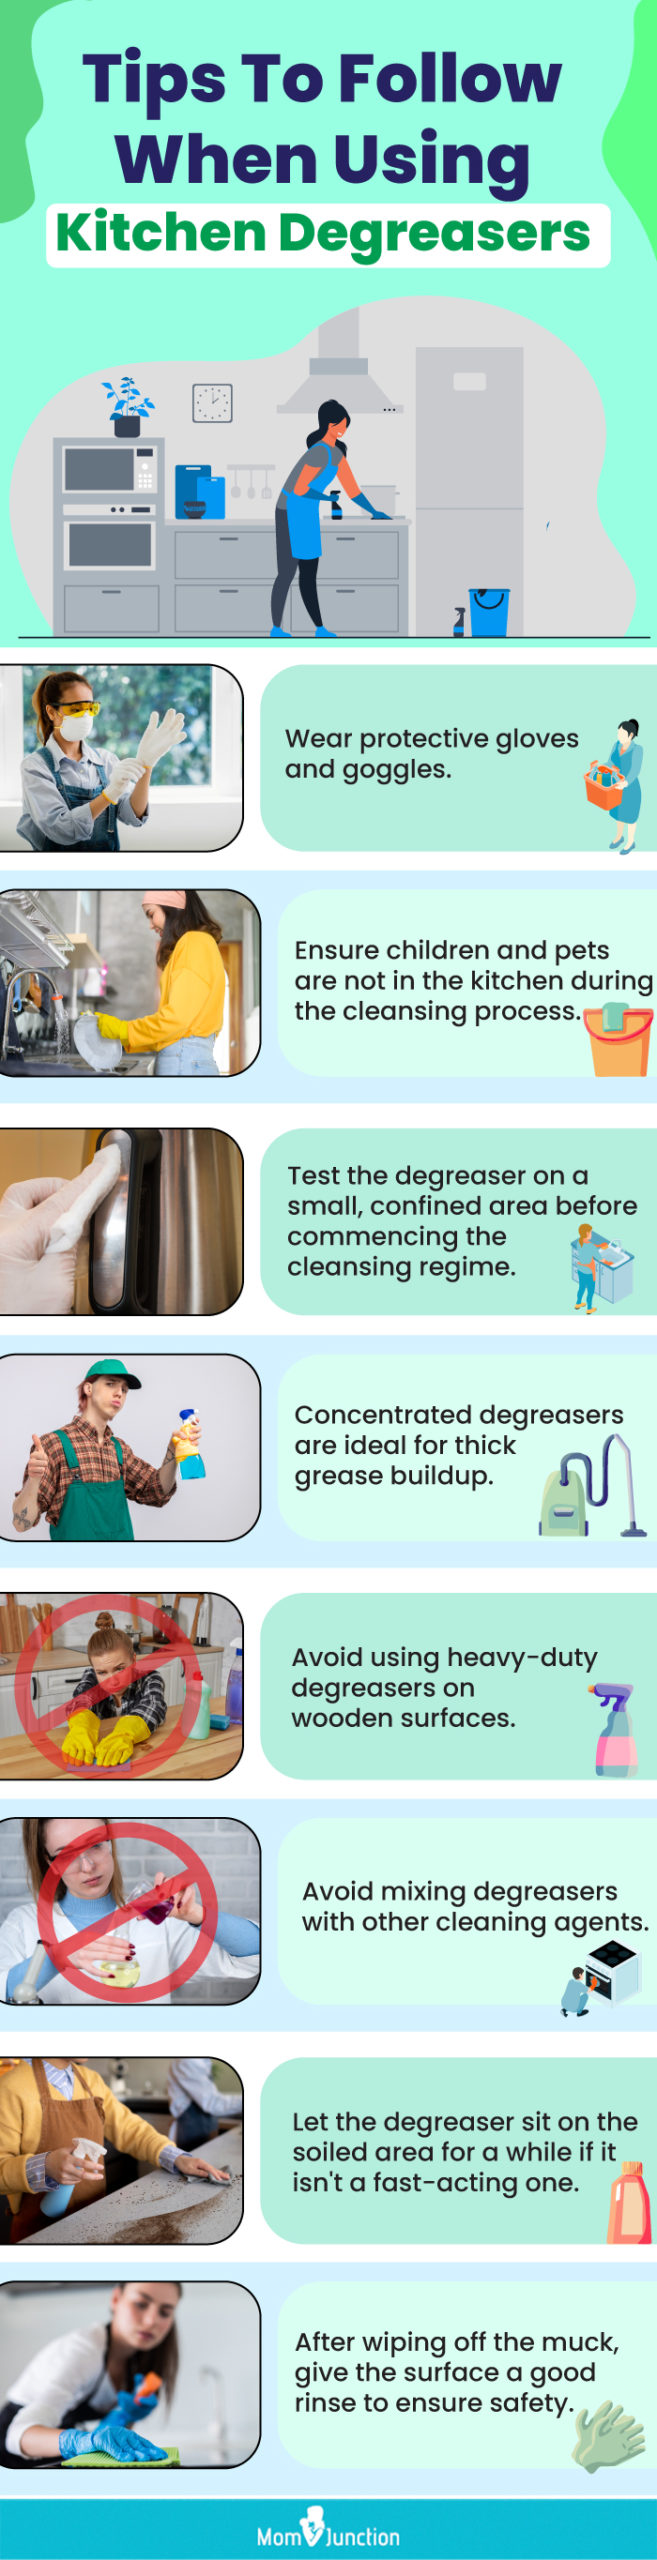 Tips To Follow When Using Kitchen Degreasers (Infographic)